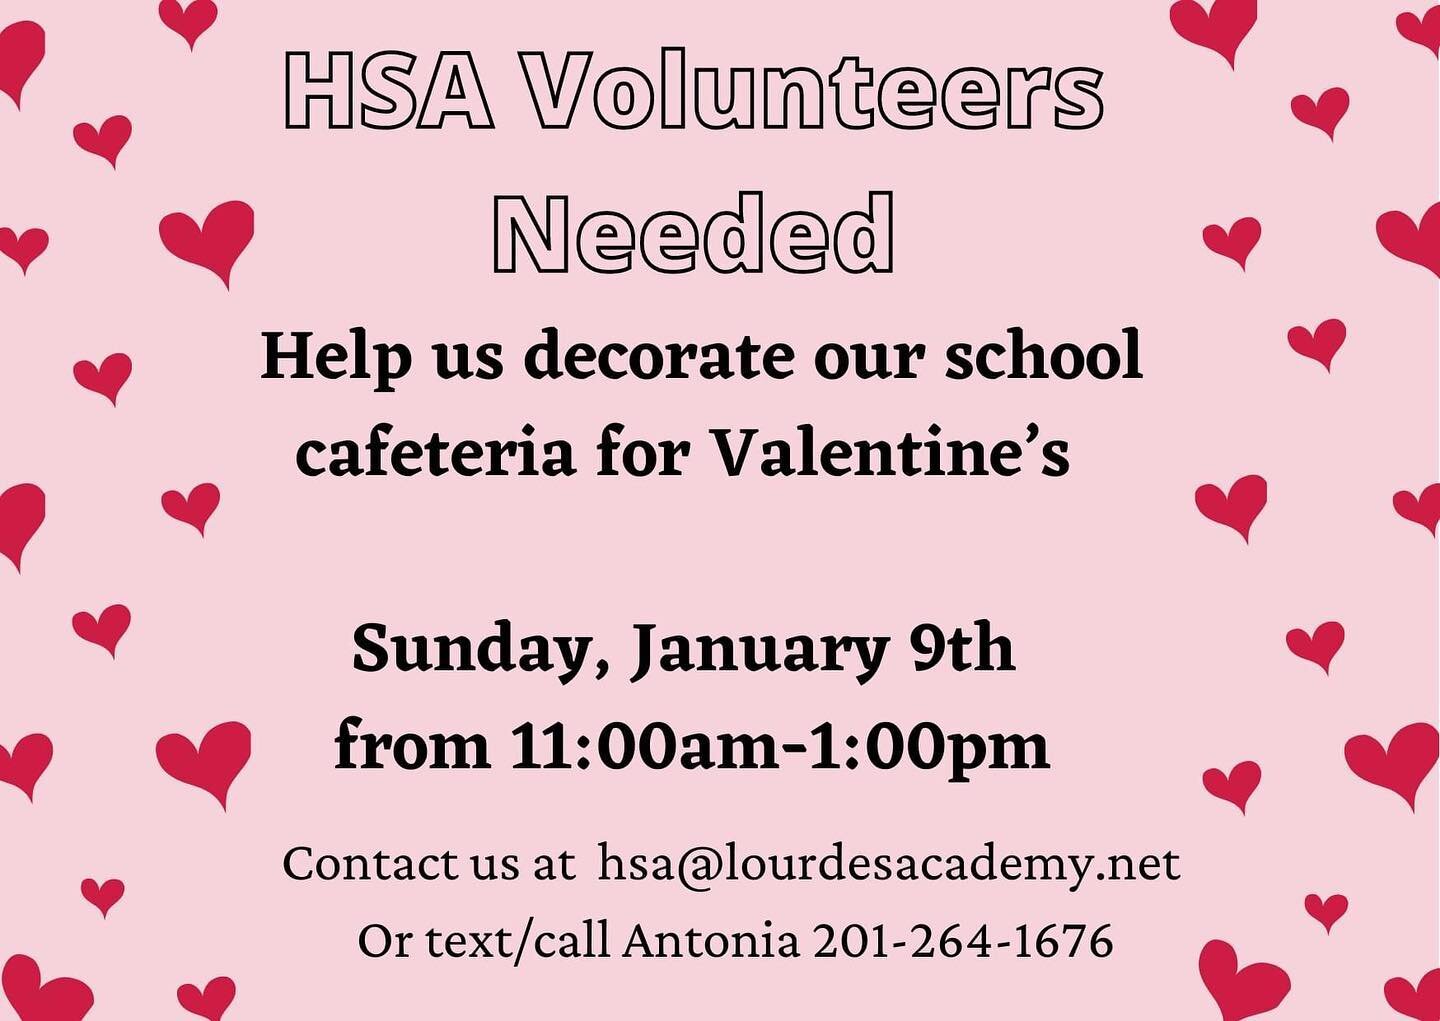 🥰 A great way to support our school and meet new families is to join the HSA decorating events!  Our HSA Board is decorating the school cafeteria on Sunday, January 9th from 11:00am to 1:00pm.  They will be pulling down Christmas decorations and jaz